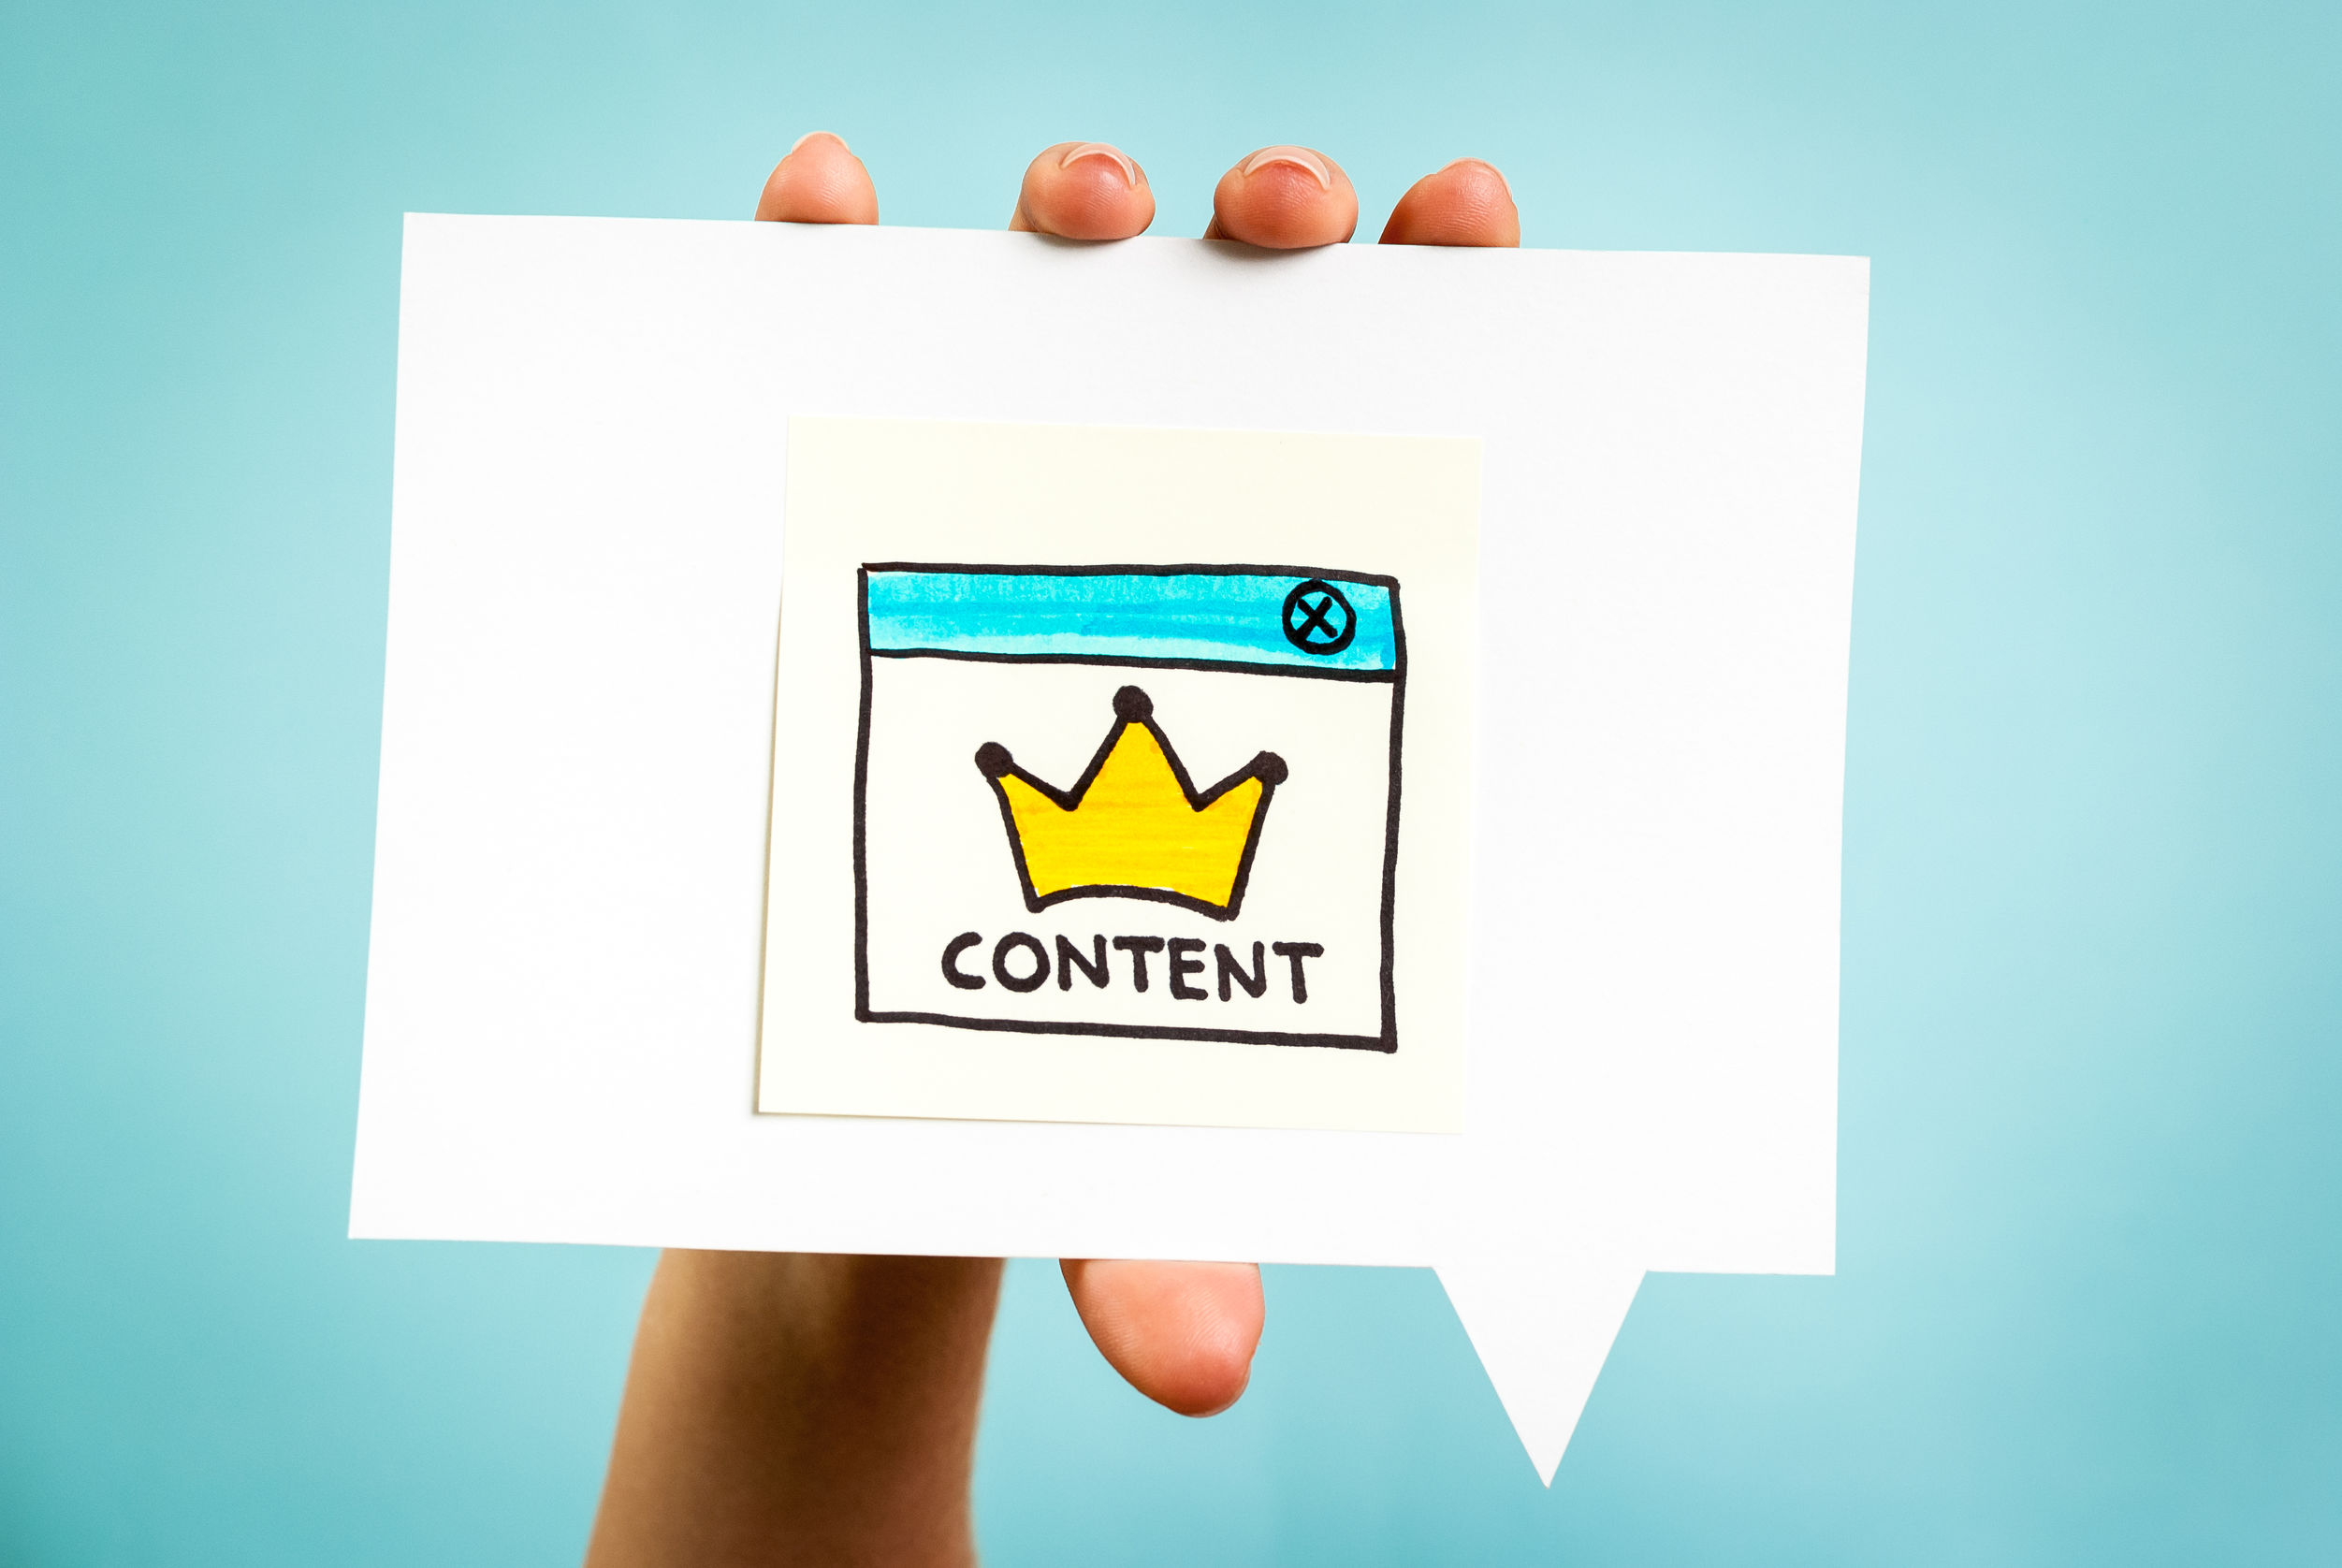 How Skimpy Web Content Hurts You